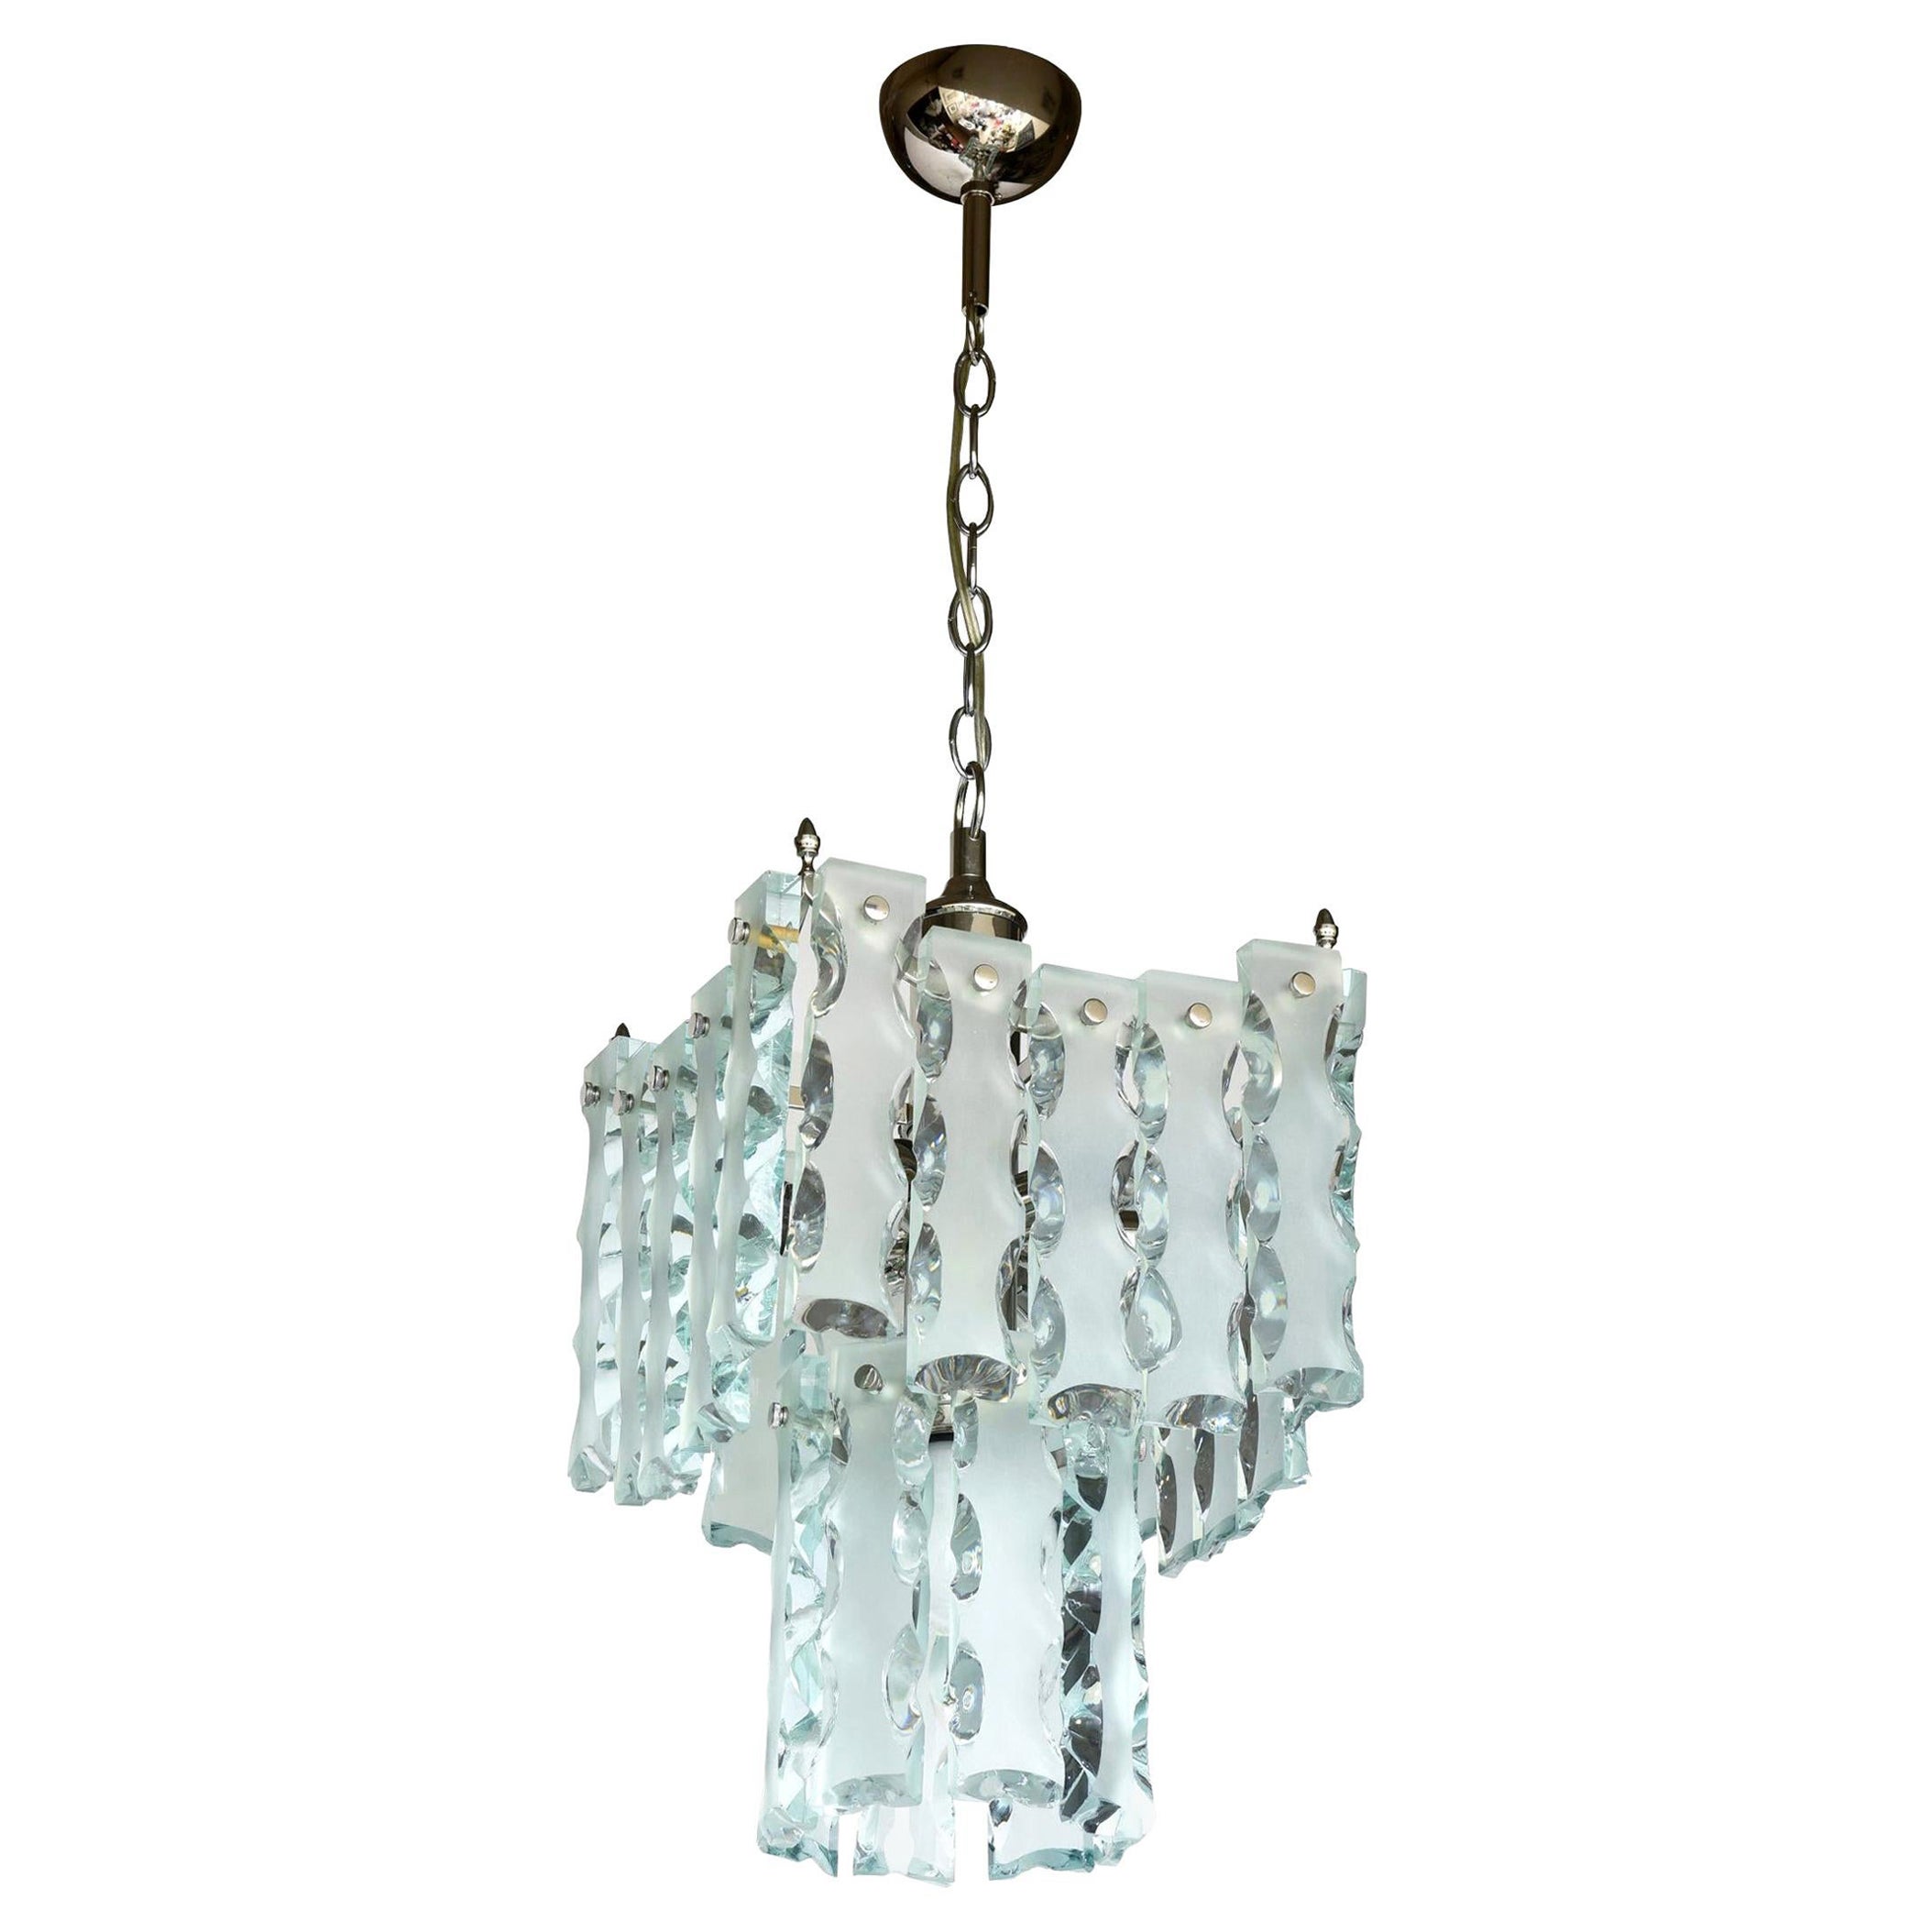  Murano Fontana Arte Attributed to Etched Glass Pendant Chandelier Vintage For Sale